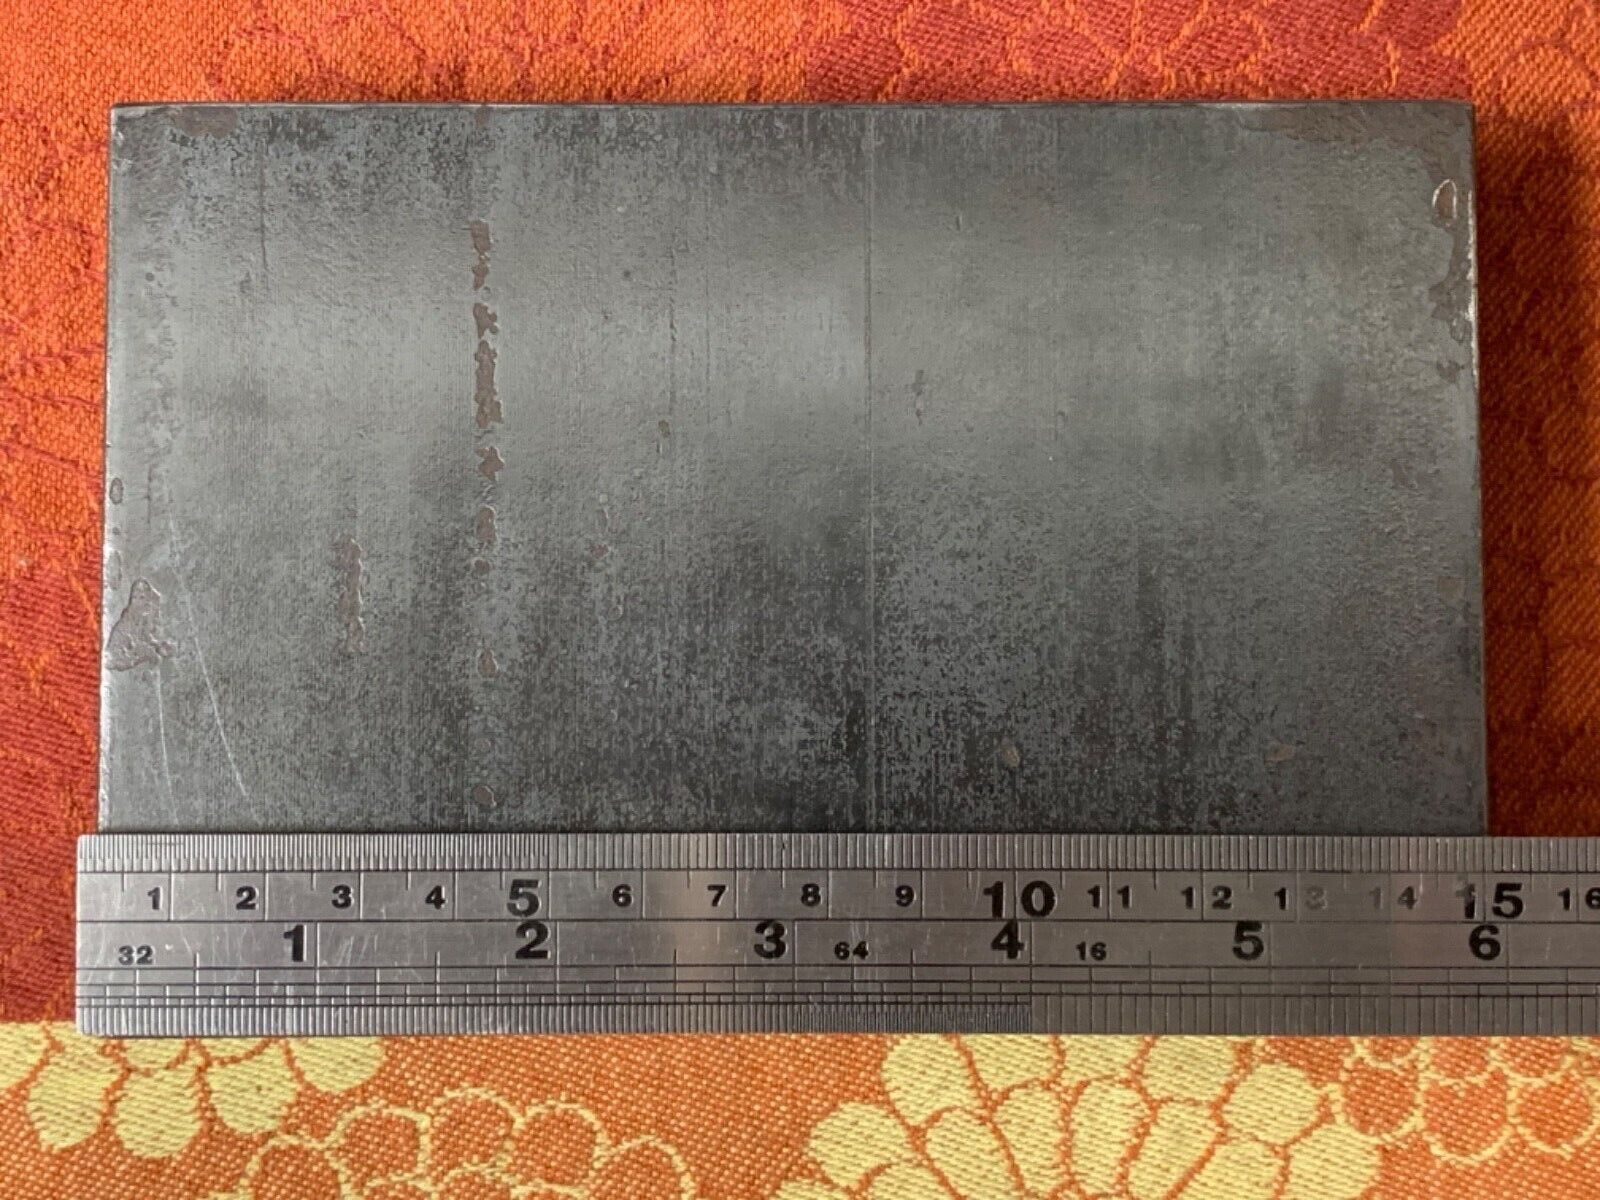 1” Thick A36 Steel  Blacksmith Hot Cut Plate, Bench Block 6” Bar saw cut to 4” 